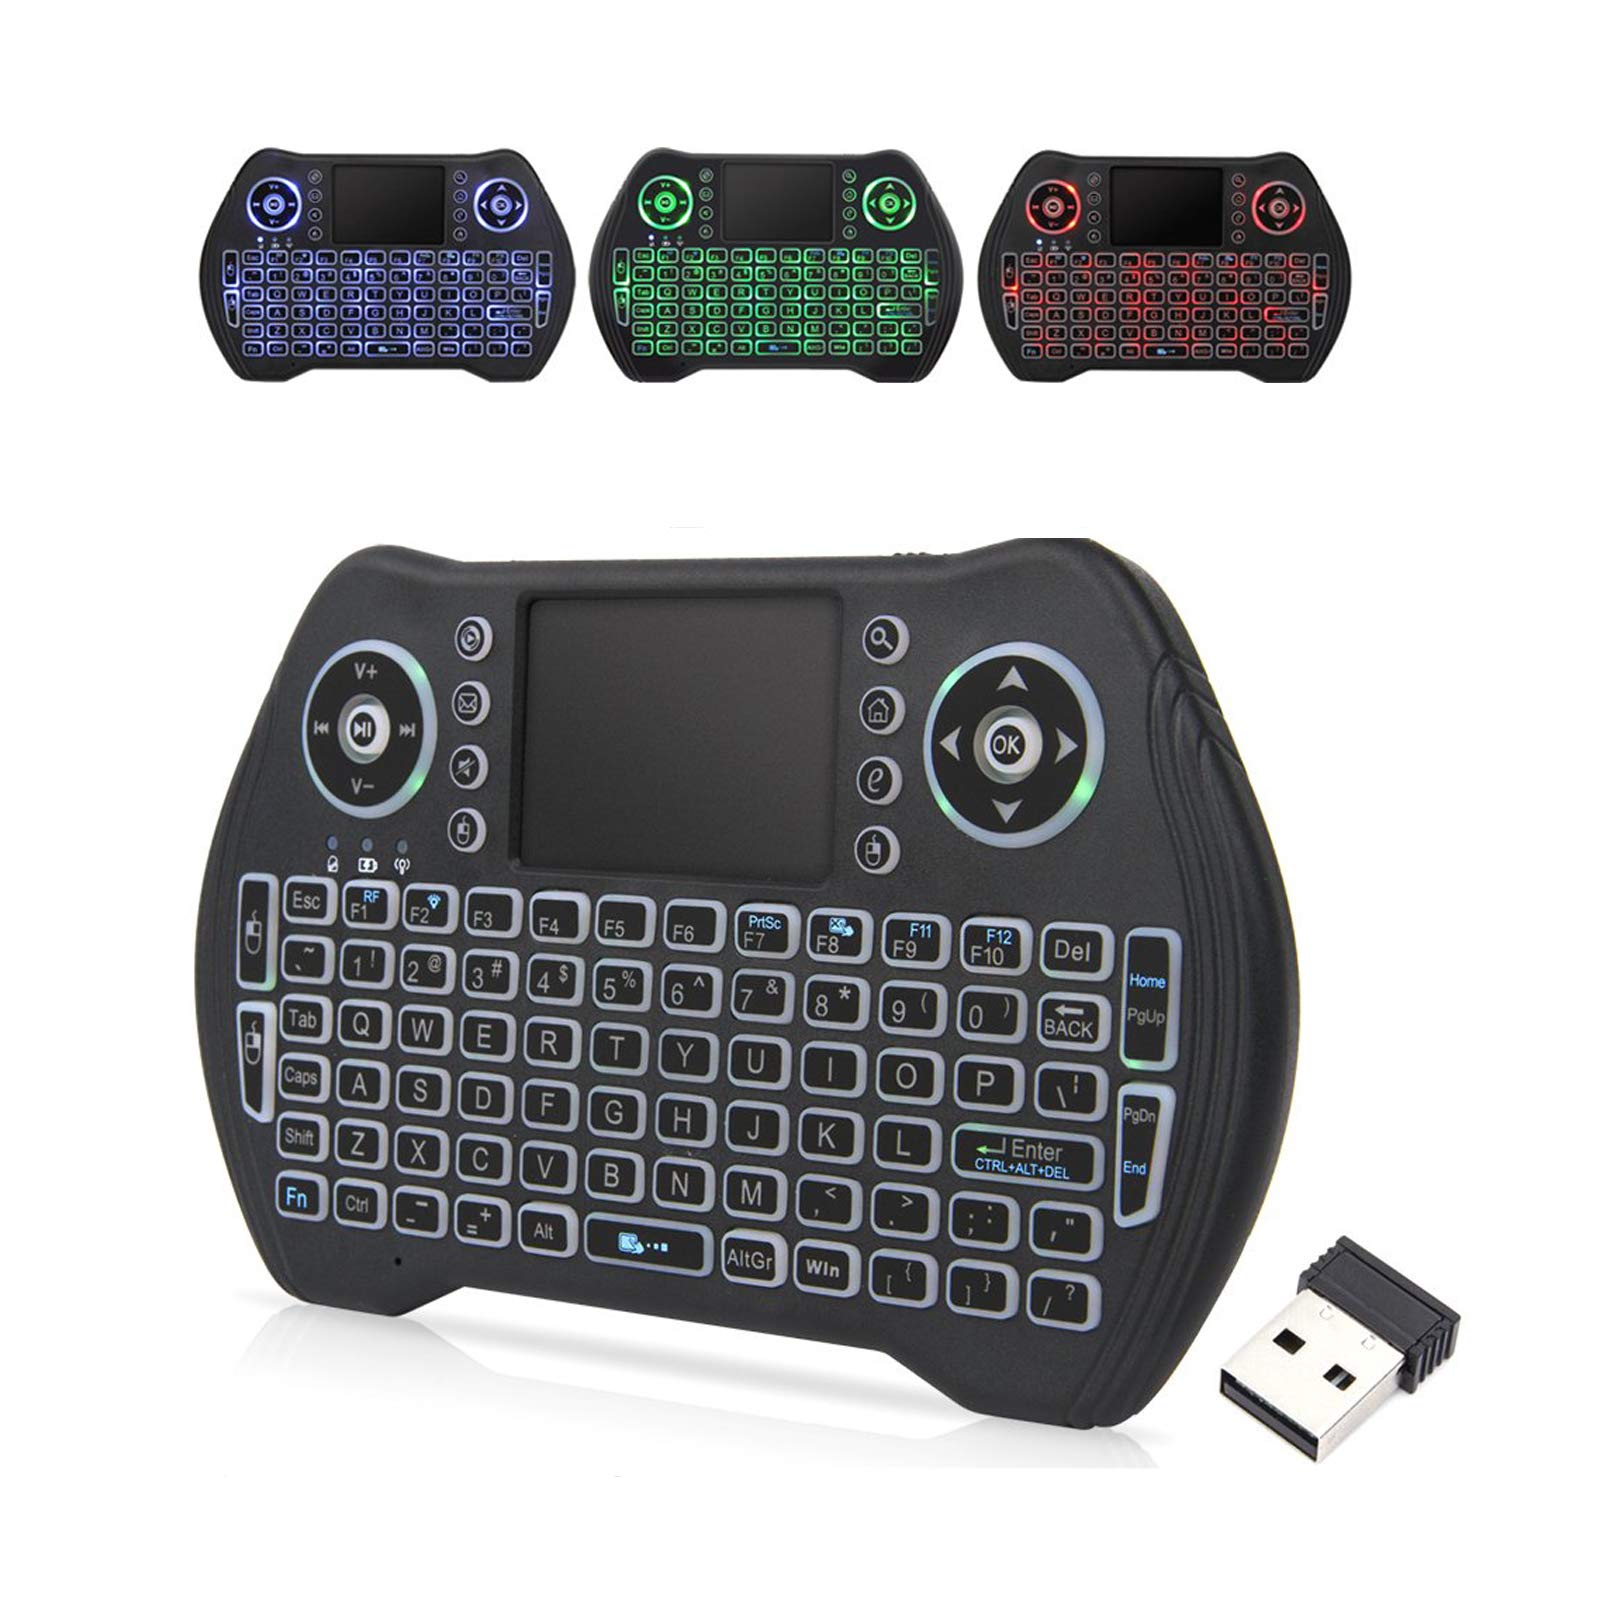 EASYTONE Backlit Mini Wireless Keyboard Touchpad Mouse Combo Remote Control with Rechargeable Li-ion Battery and Multimedia Keys